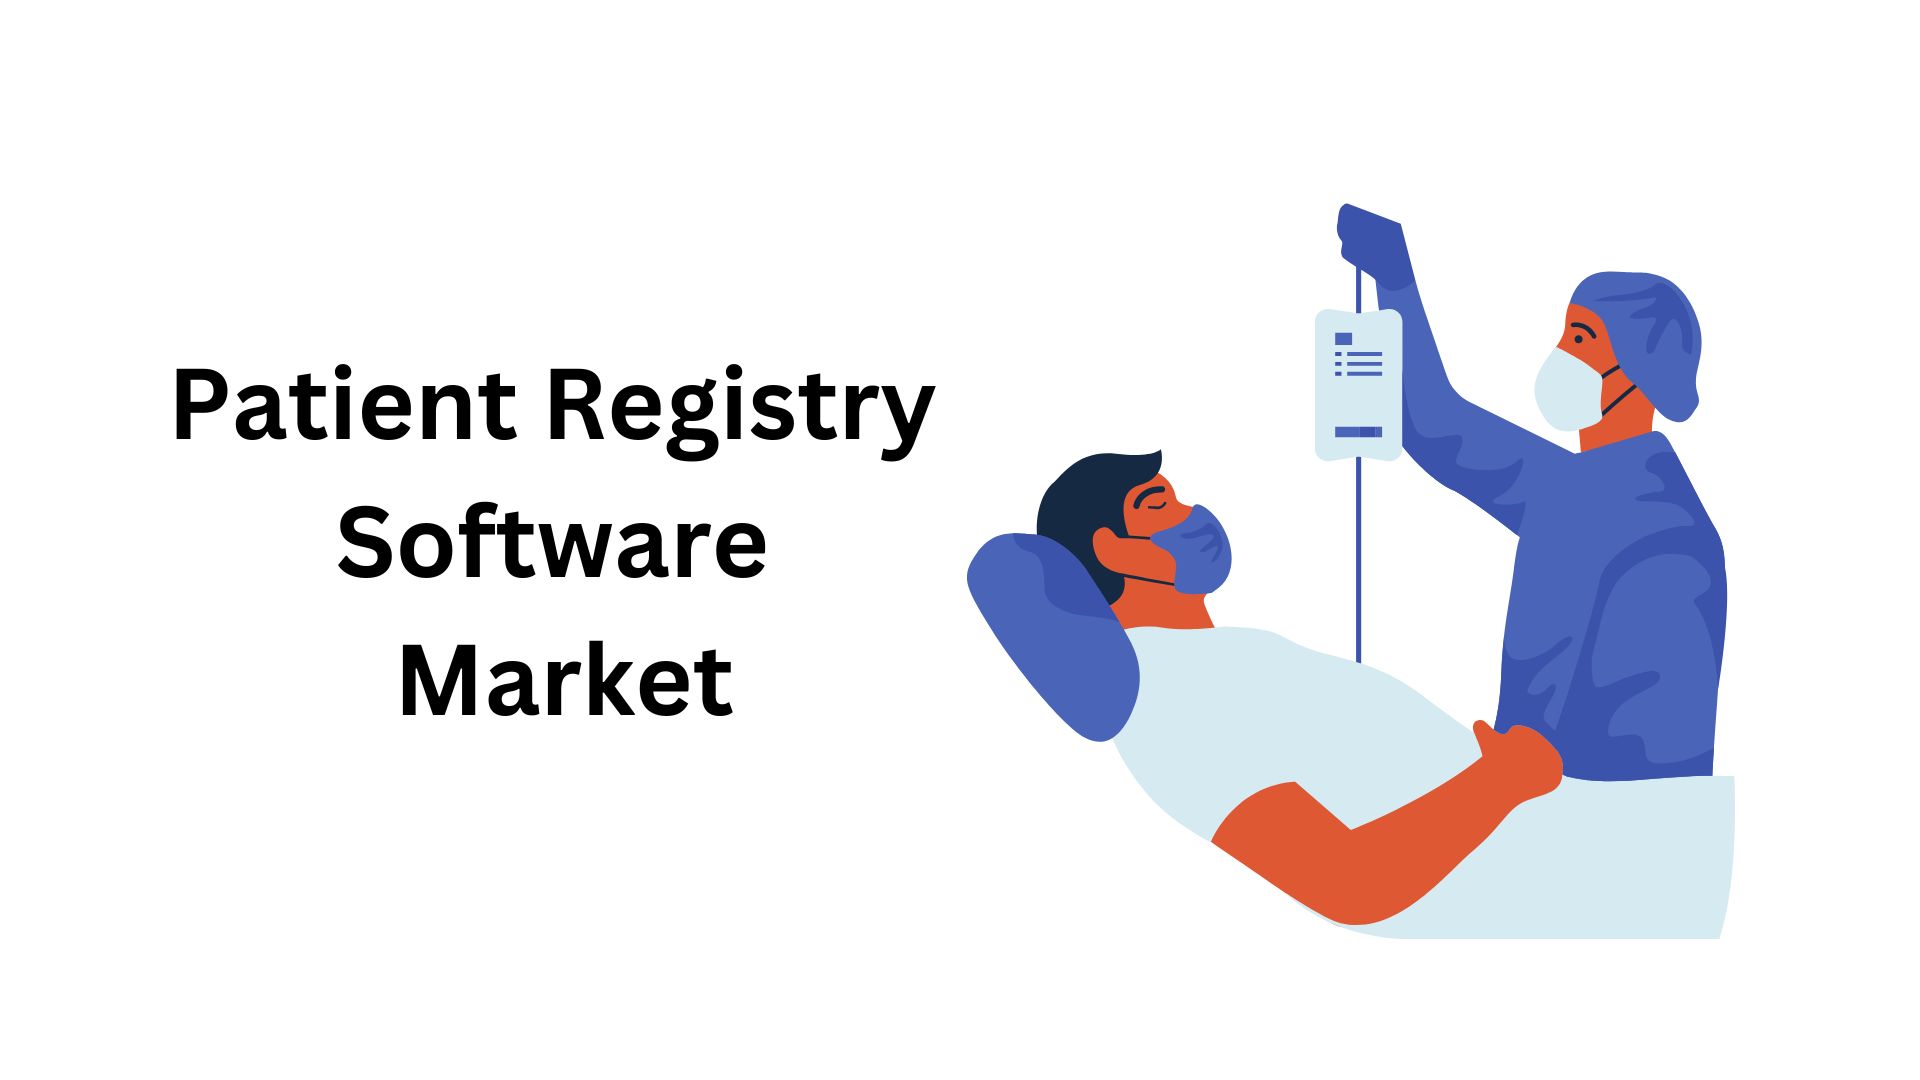 Patient Registry Software Market To Develop Speedily With CAGR Of 12% By 2033